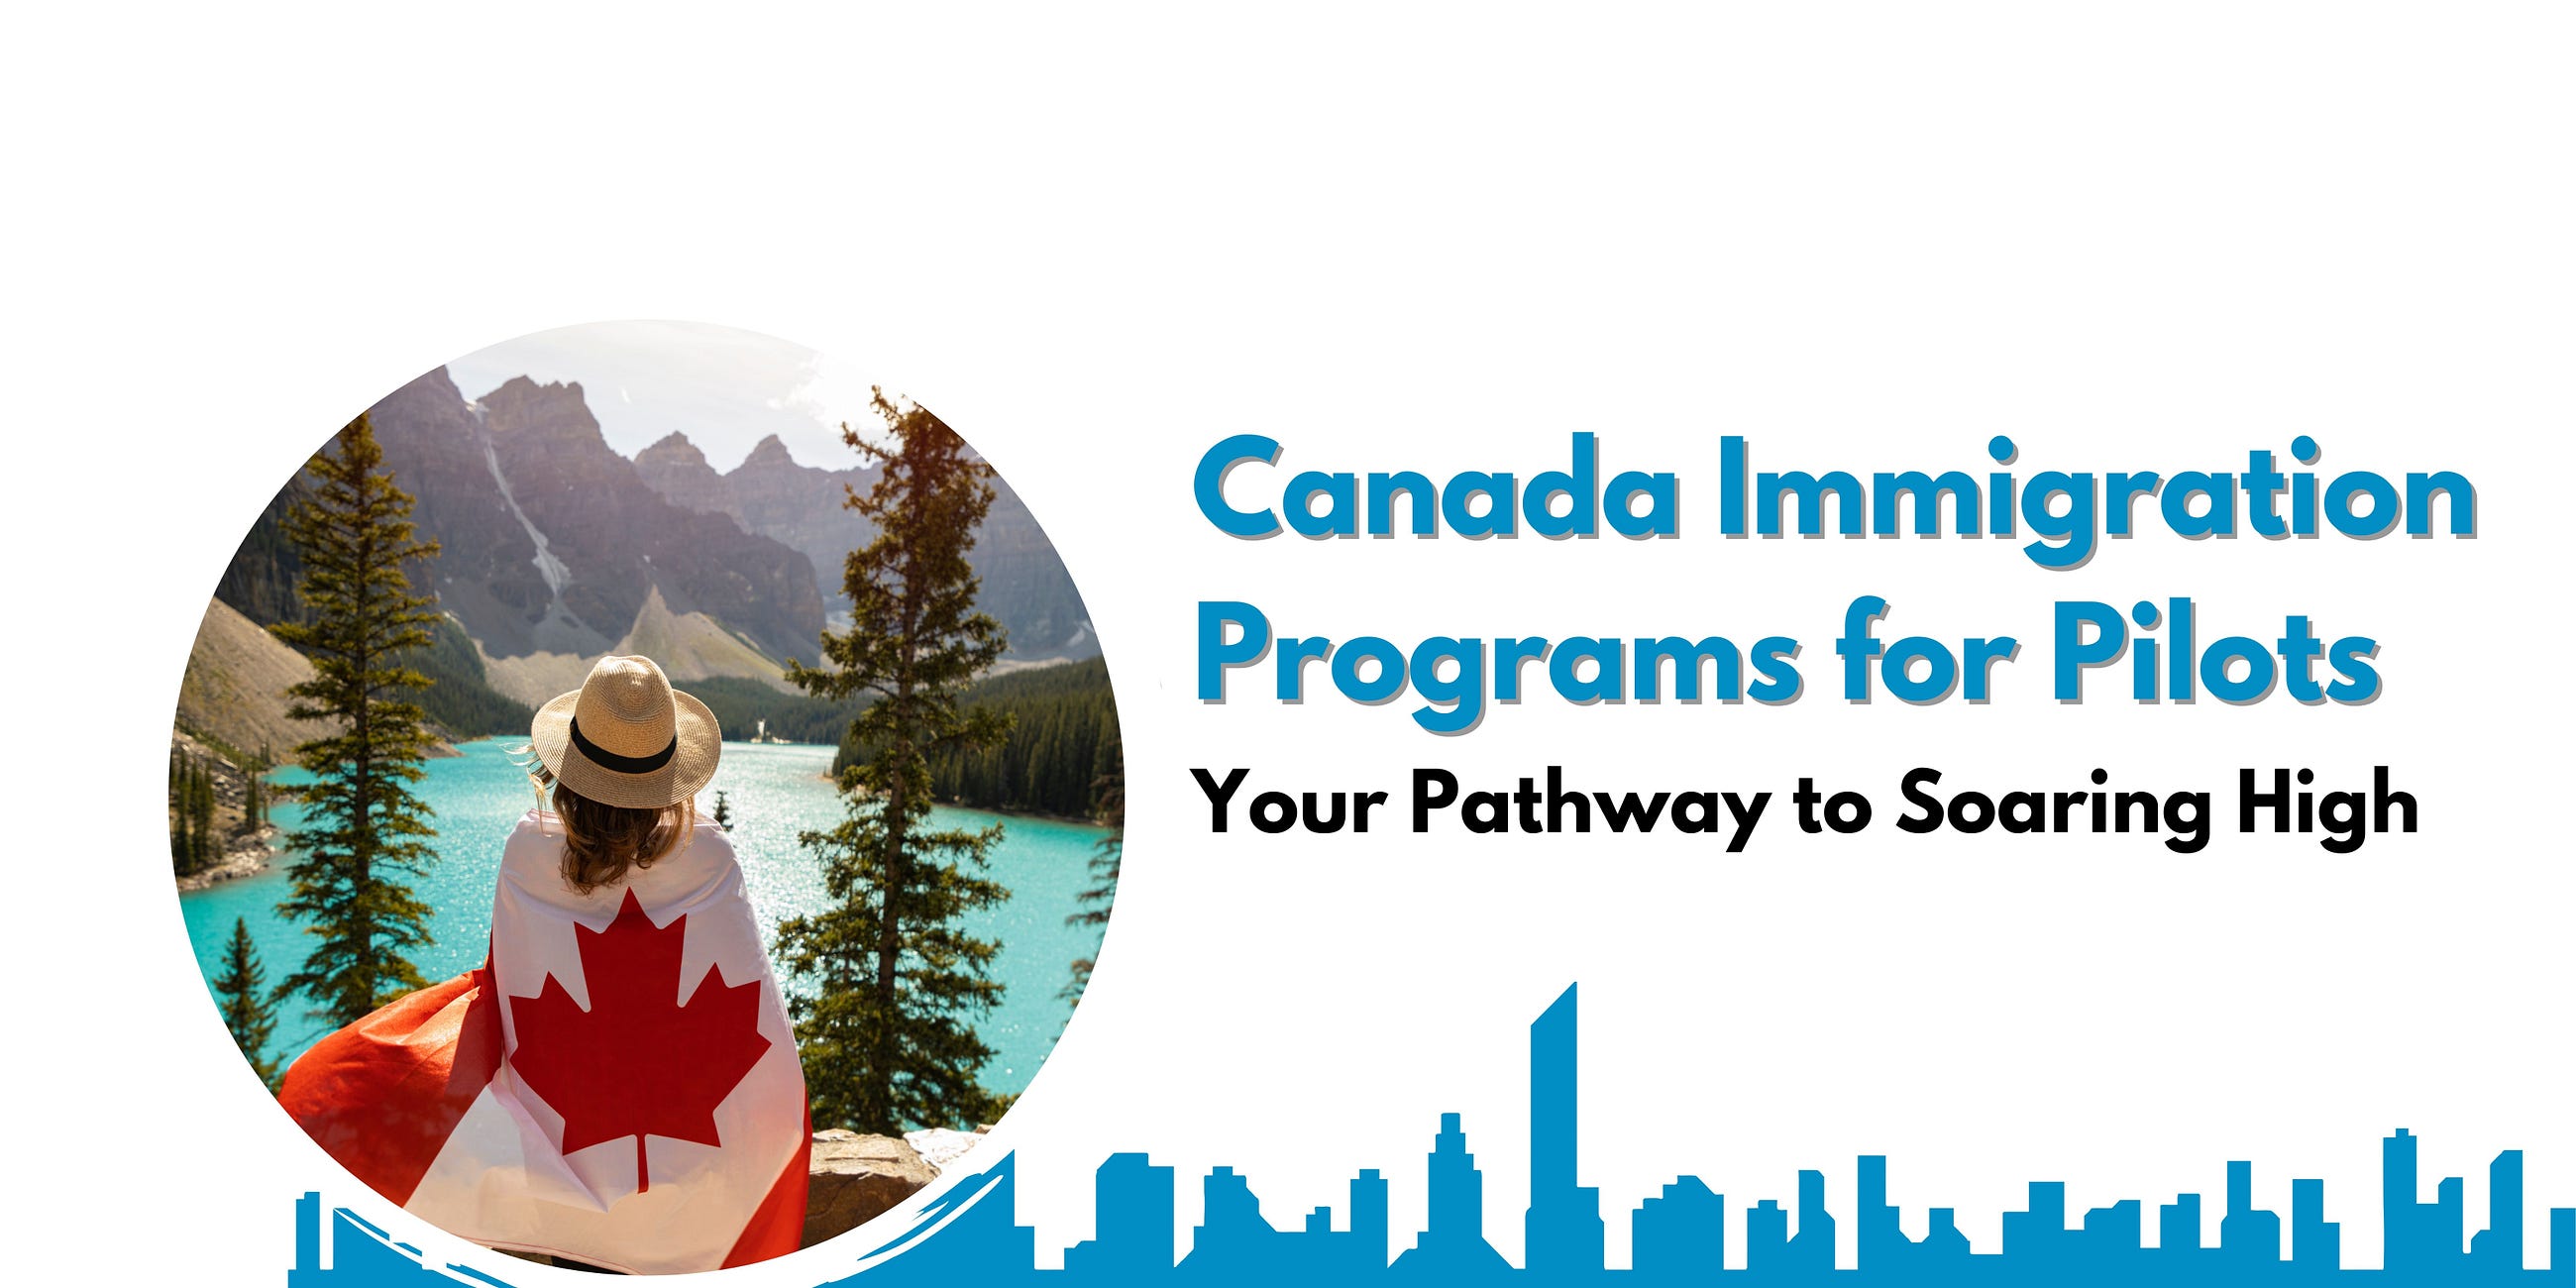 Canada Immigration Programs for Pilots